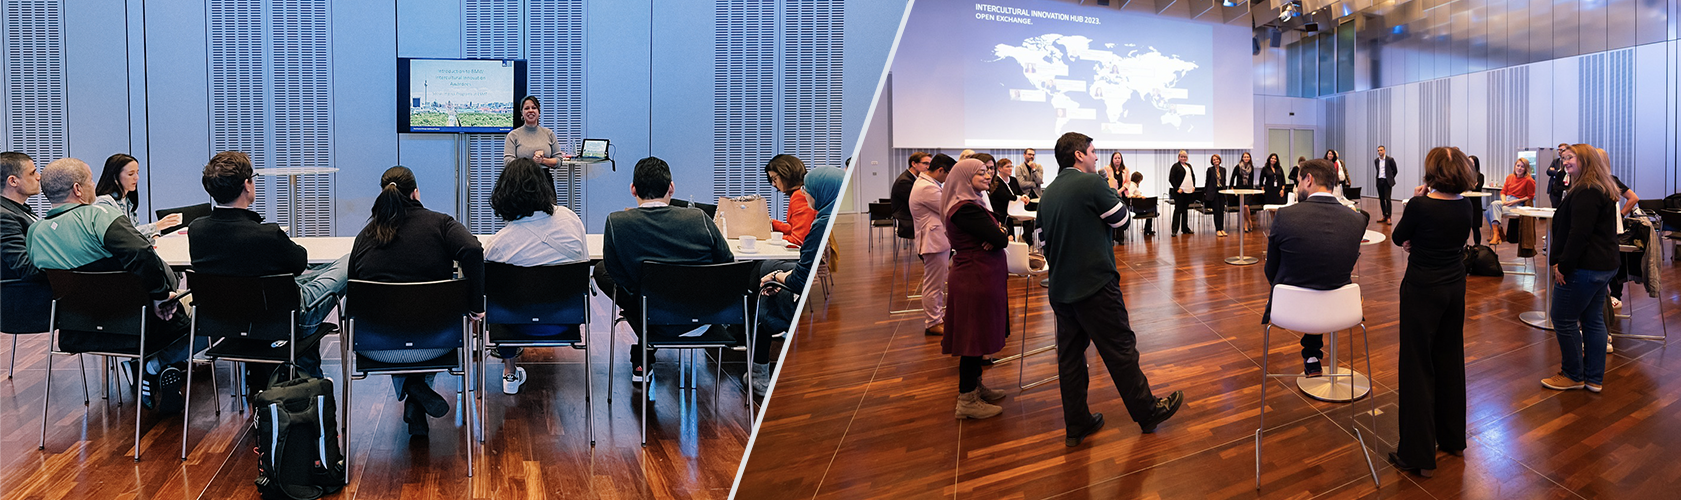 UNAOC, the BMW Group and Accenture Host First Capacity-Building Workshop for Recipients of the Current Edition of the Intercultural Innovation Hub in Munich, Germany